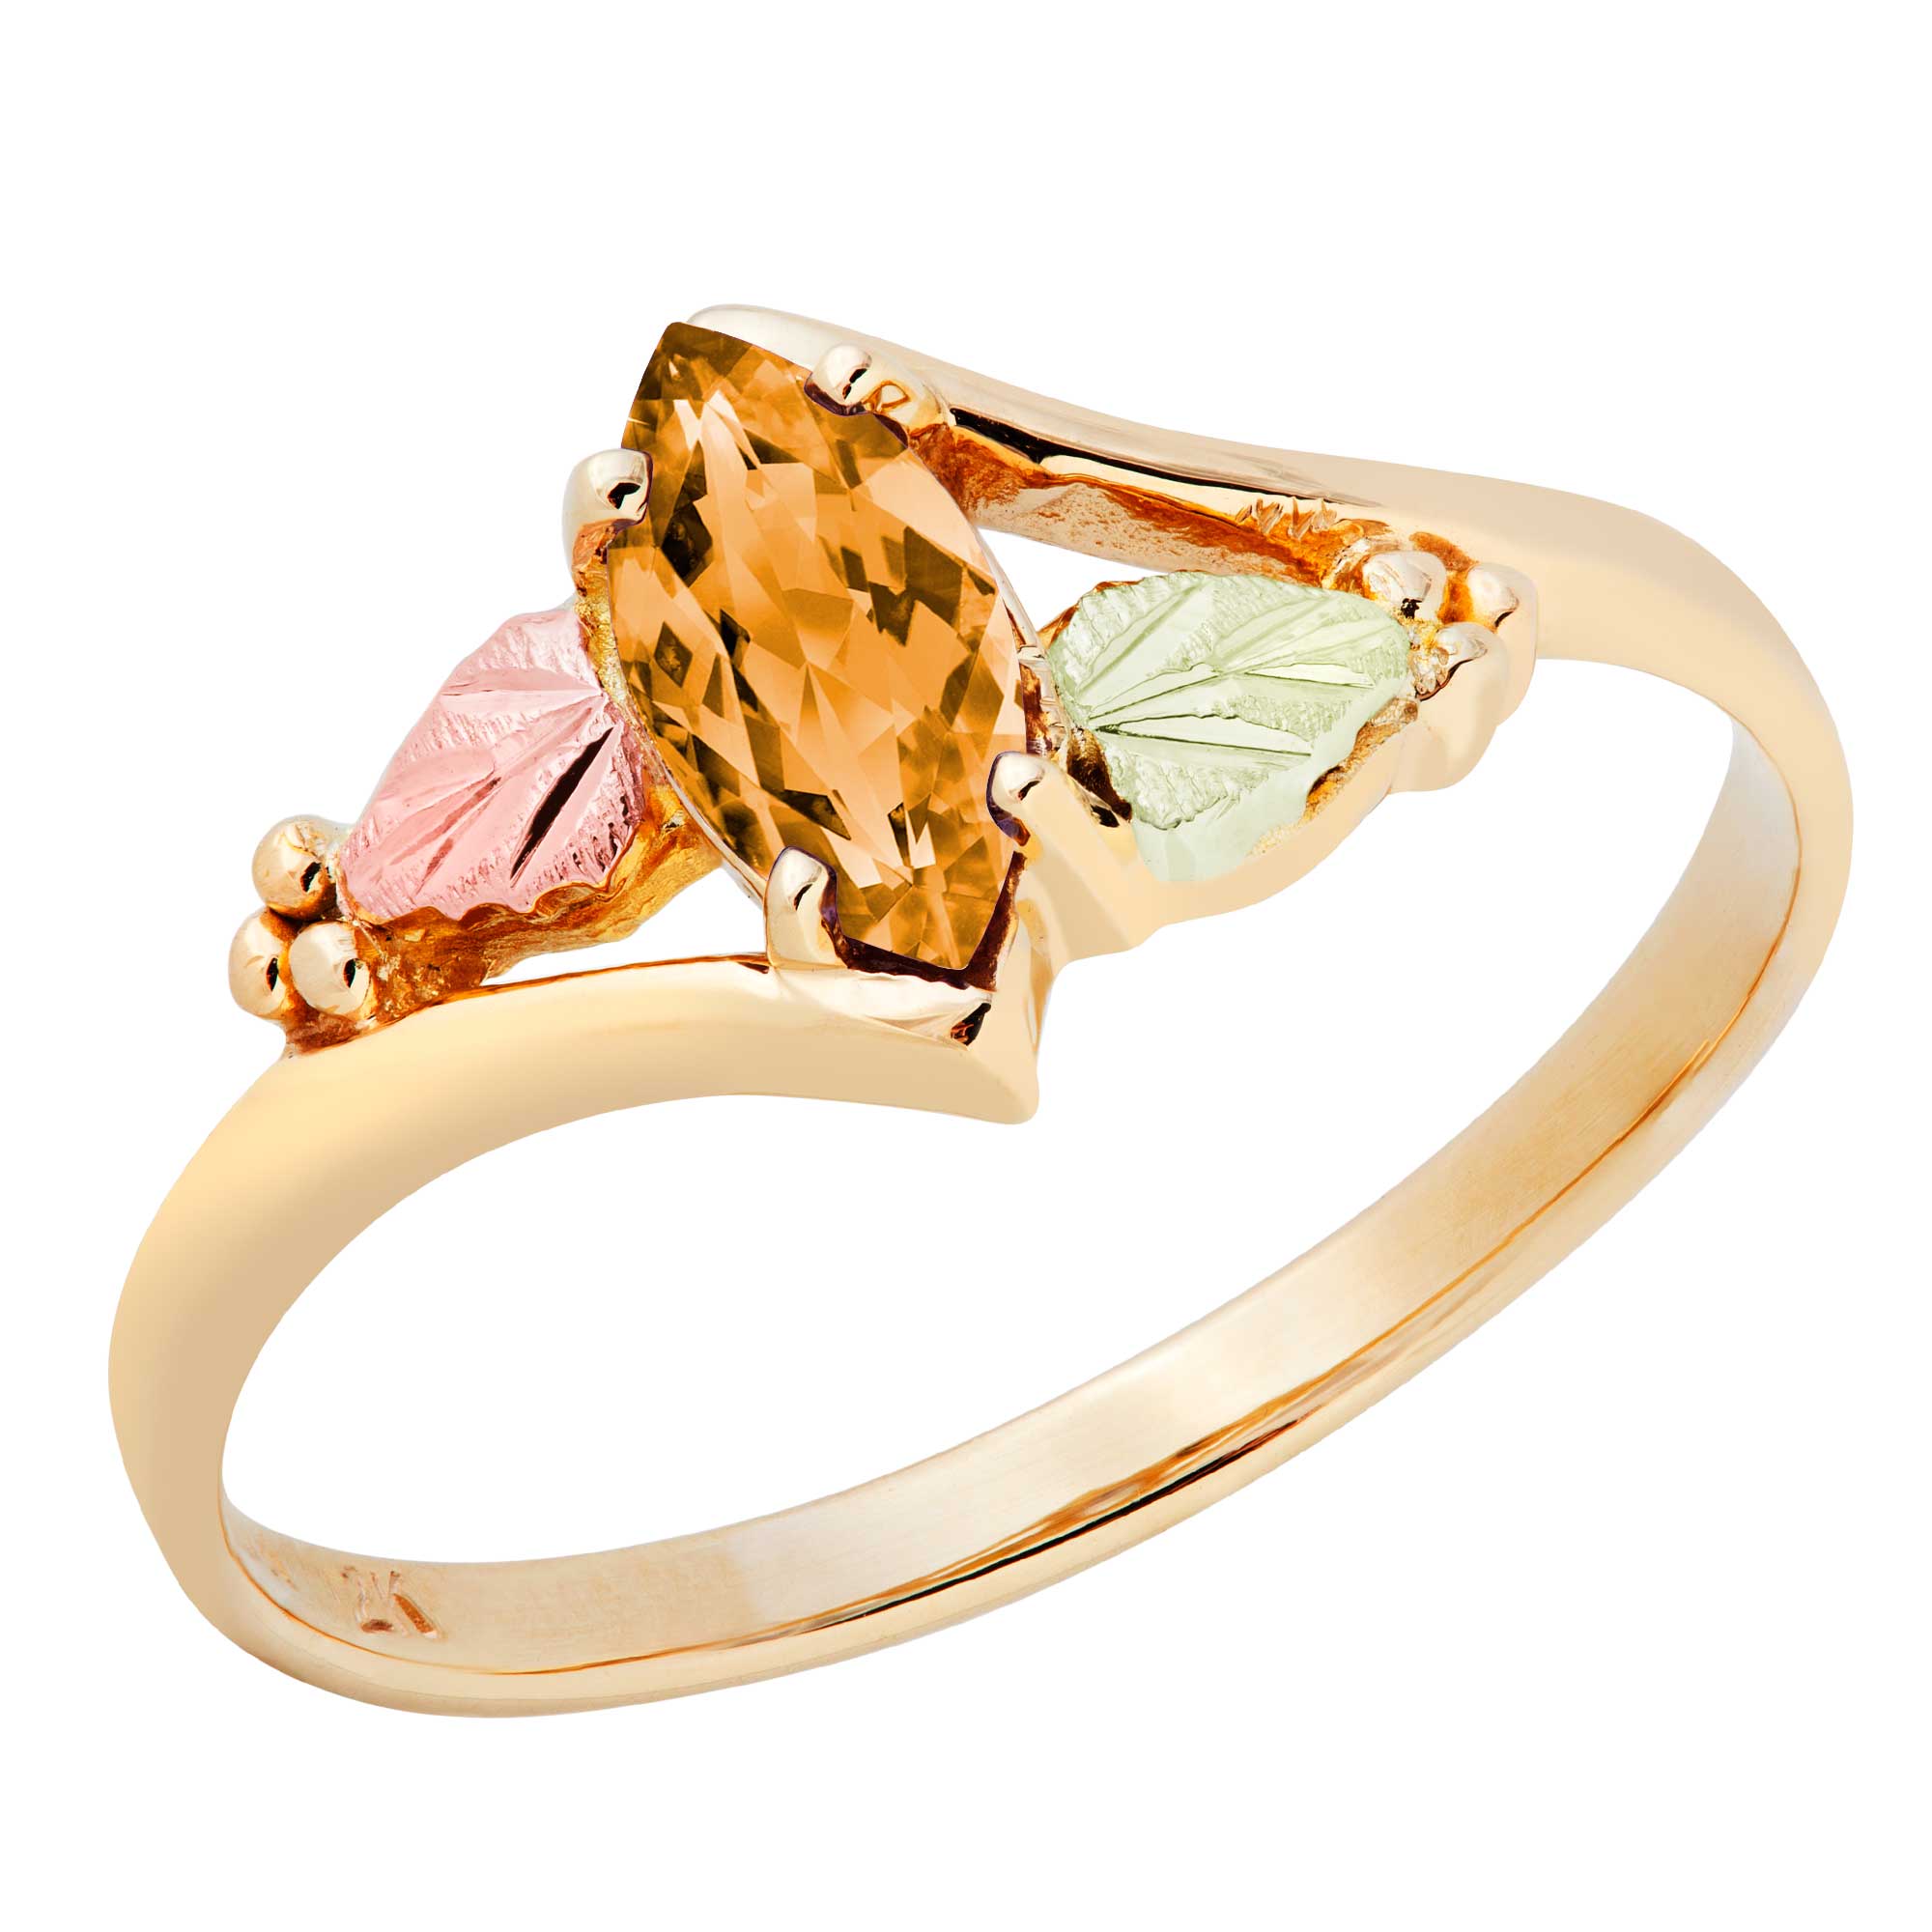 Created Gold Topaz Marquise November Birthstone Bypass Ring, Black Hills Gold motif. 